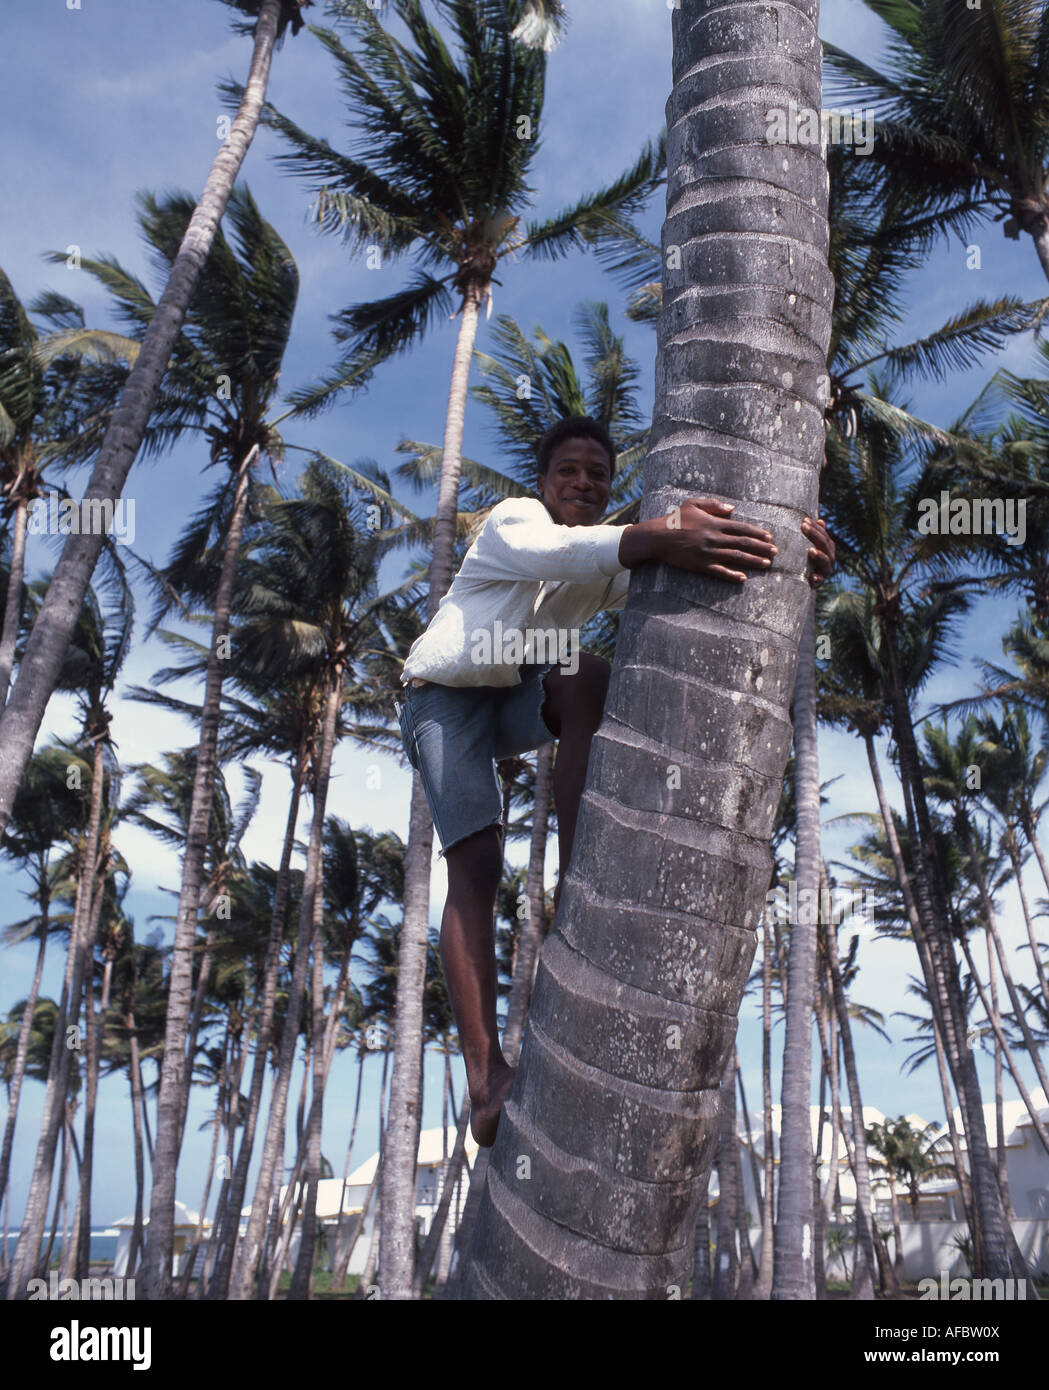 Local boy climbing coconut palm, St Kitts and Nevis, St Kitts, Lesser Antilles, Caribbean Stock Photo